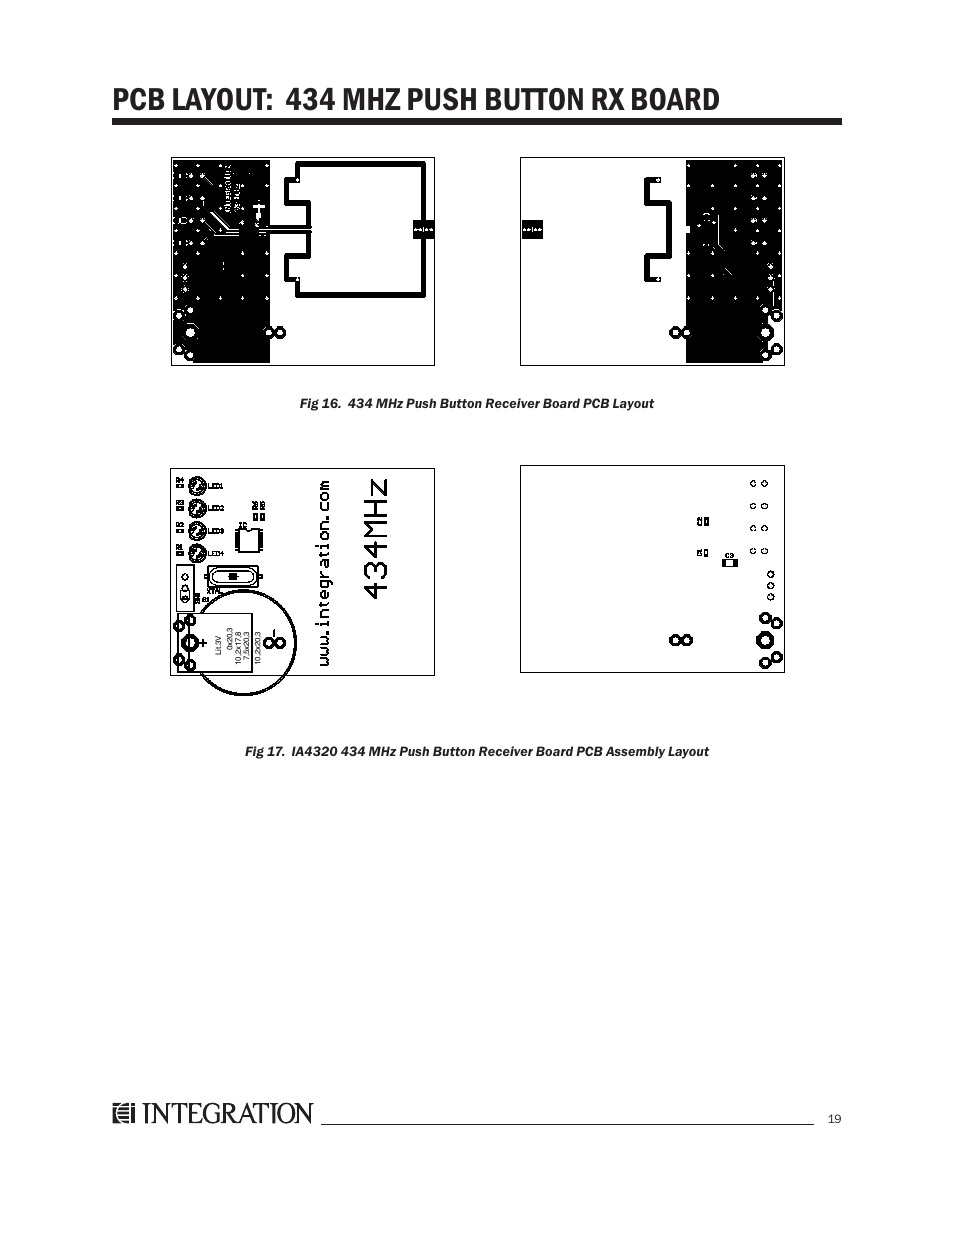 Pcb layout: 434 mhz push button rx board | Integration 2.0r User Manual | Page 23 / 26